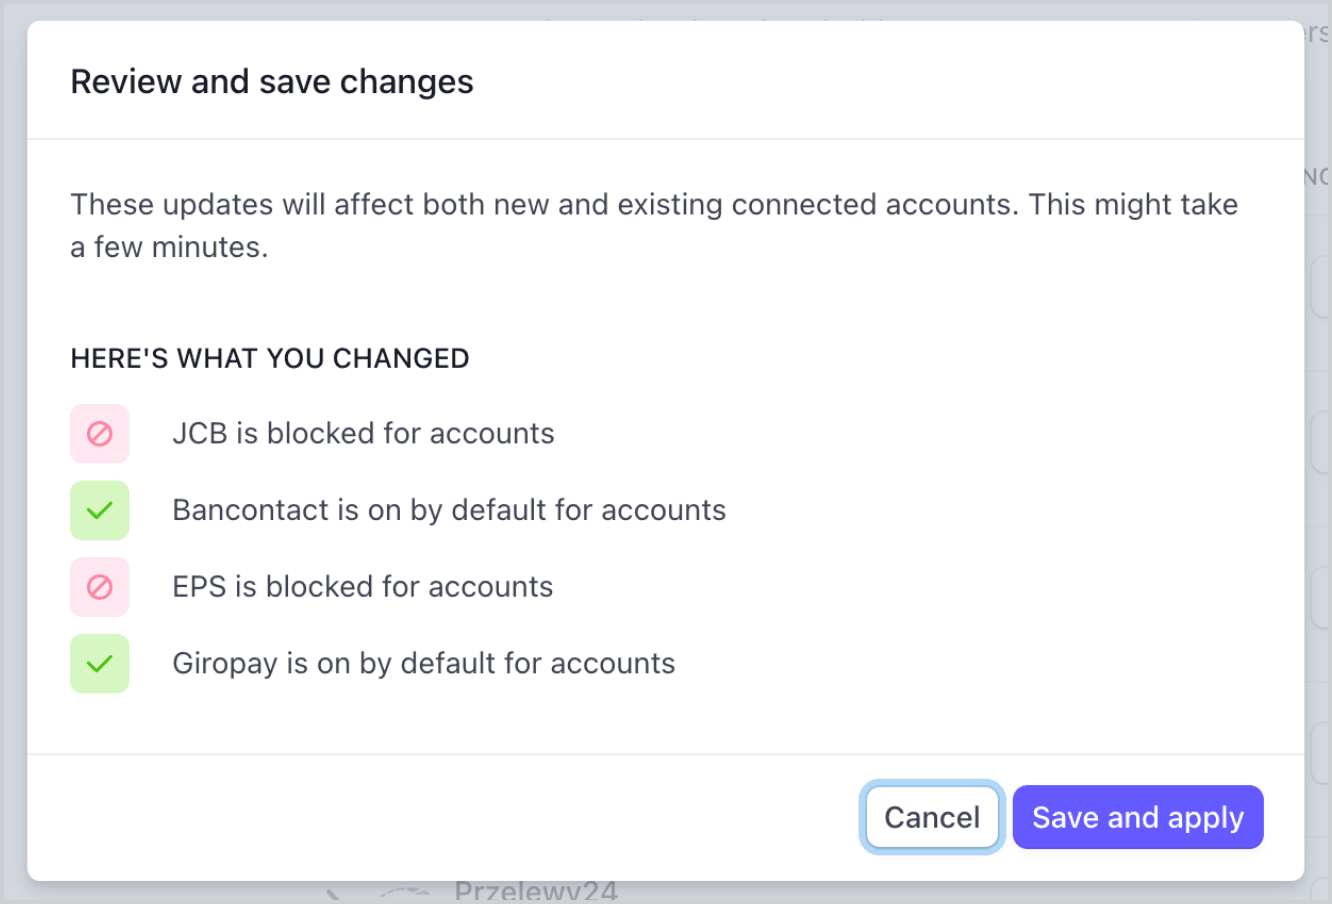 Dialog that shows after clicking Save button with a list of what the user changed